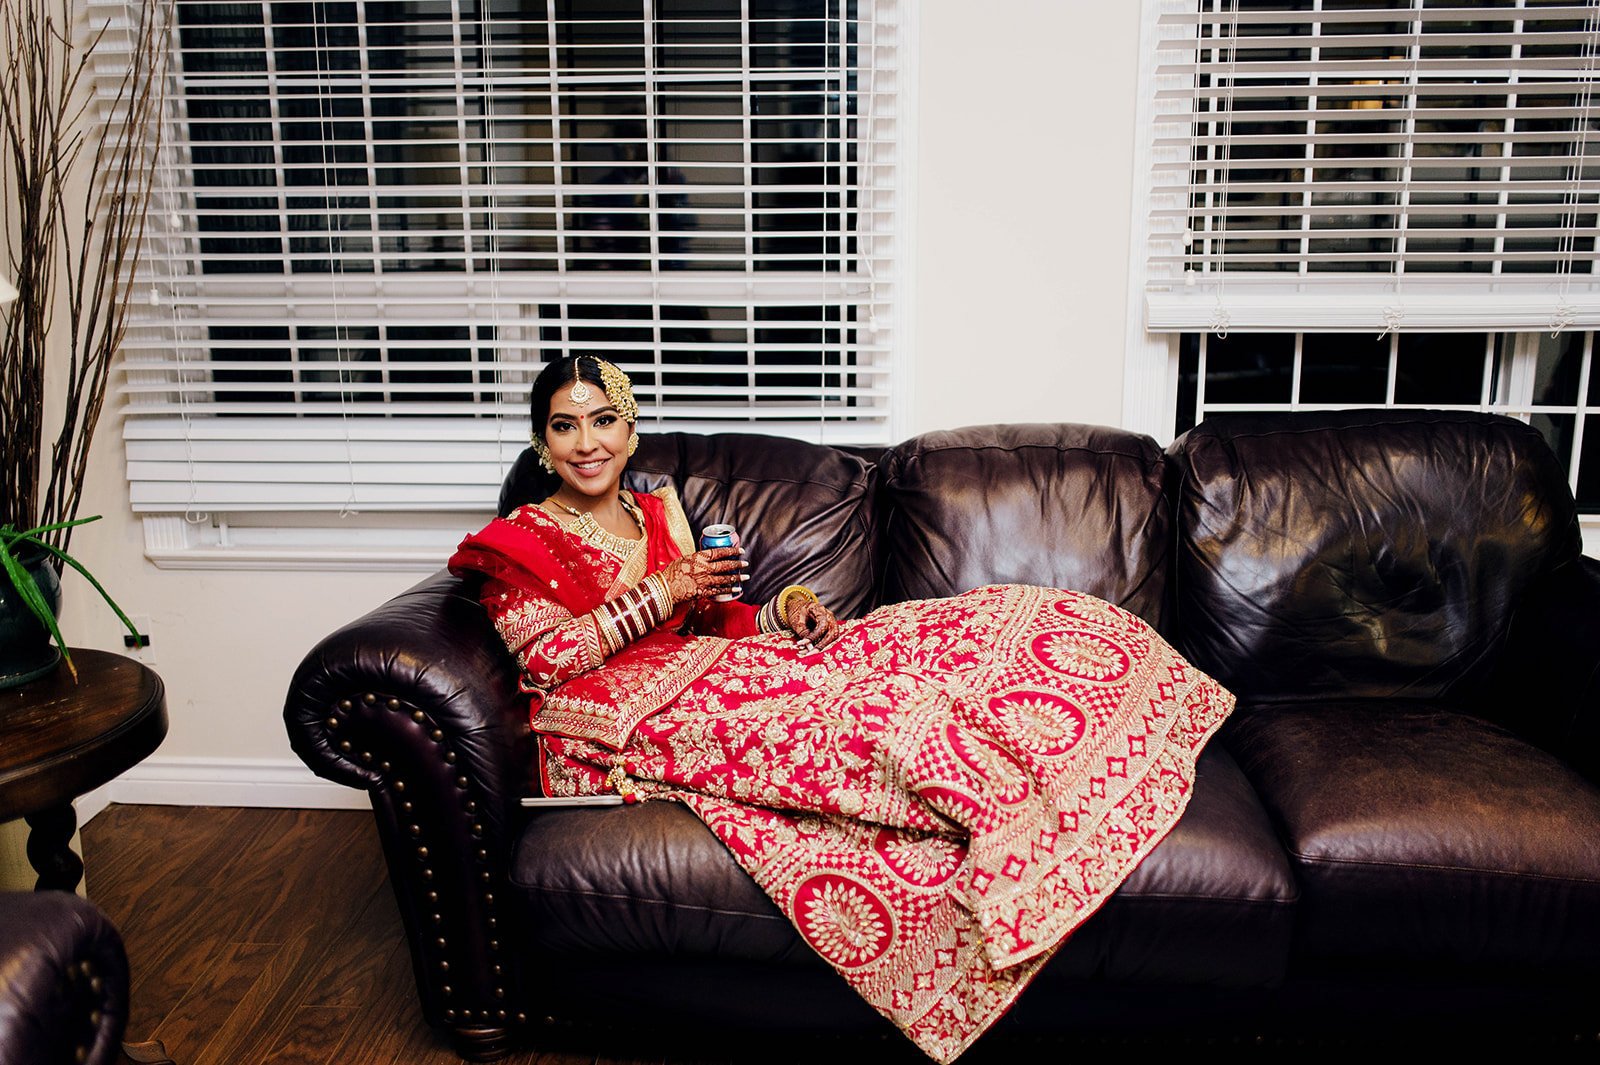 An indian bride relaxes on a brown leather couch as she sips a drink.